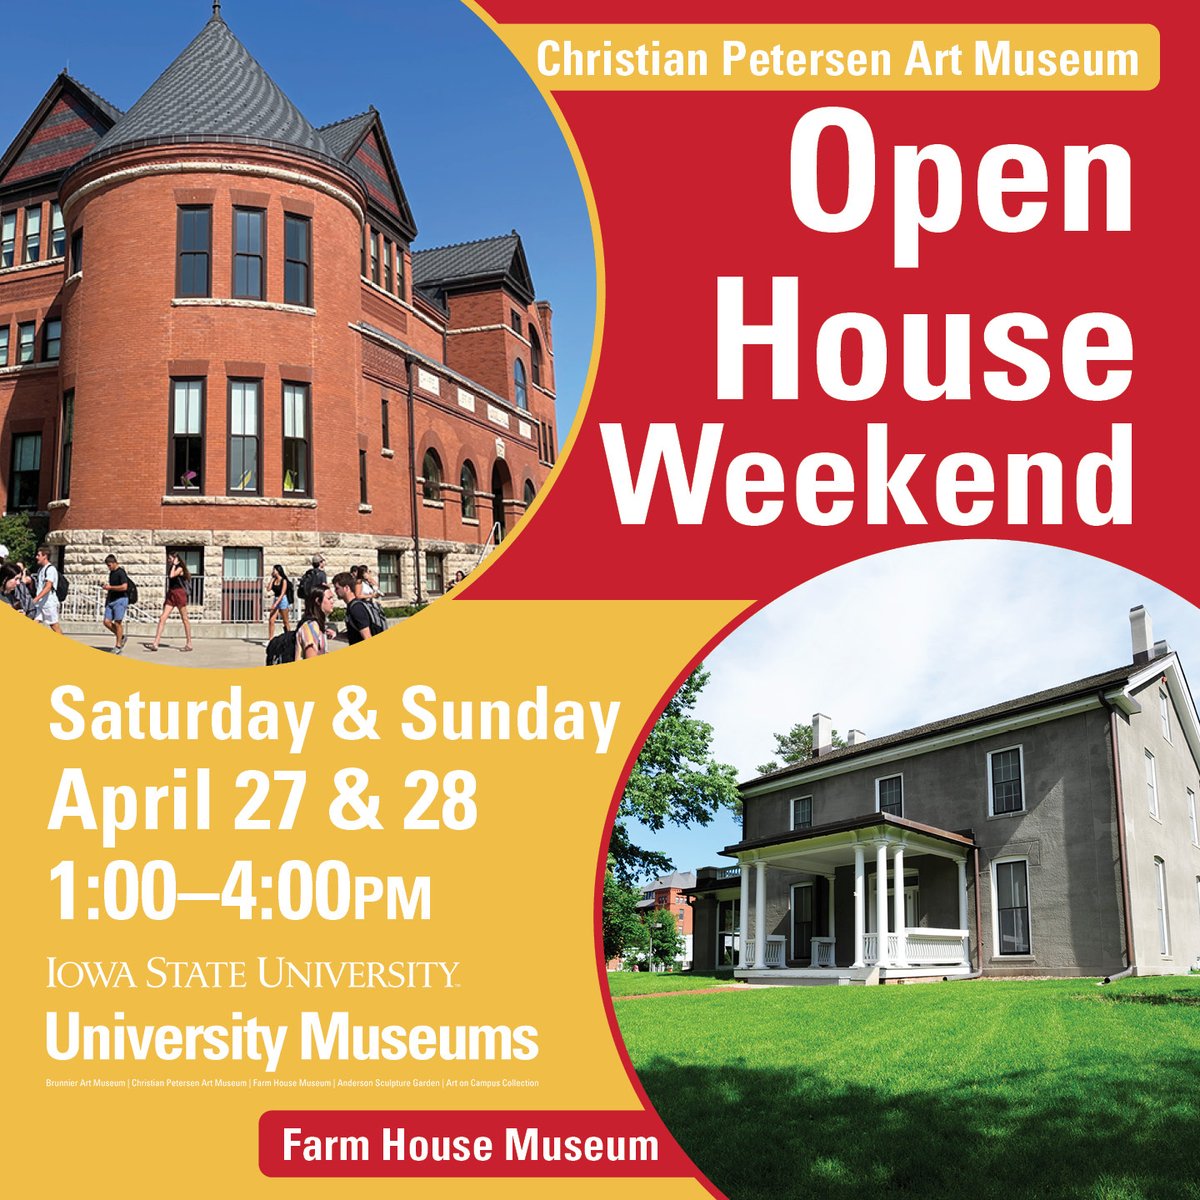 Join us for Open House Weekend at both the Christian Petersen Art Museum and the Farm House Museum on Saturday & Sunday, April 27 & 28 from 1:00-4:00pm each day! #OpenHouse #FreeAdmission #ISU #IowaState #FarmHouse #FarmHouseMuseum #ChristianPetersen